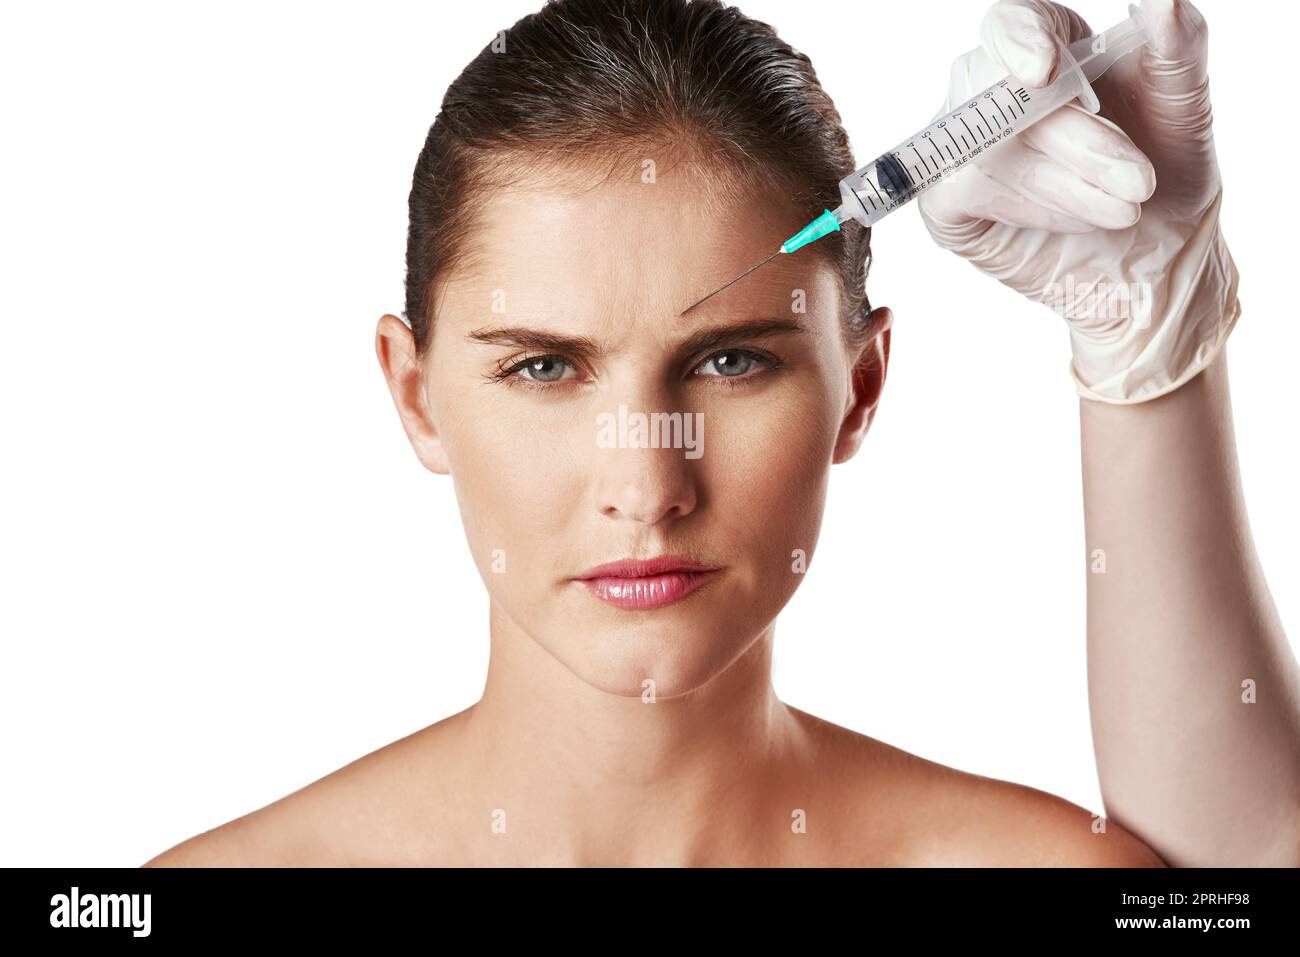 She wont let age win without a fight. Studio shot of an attractive young woman getting an injection for cosmetic purposes. Stock Photo